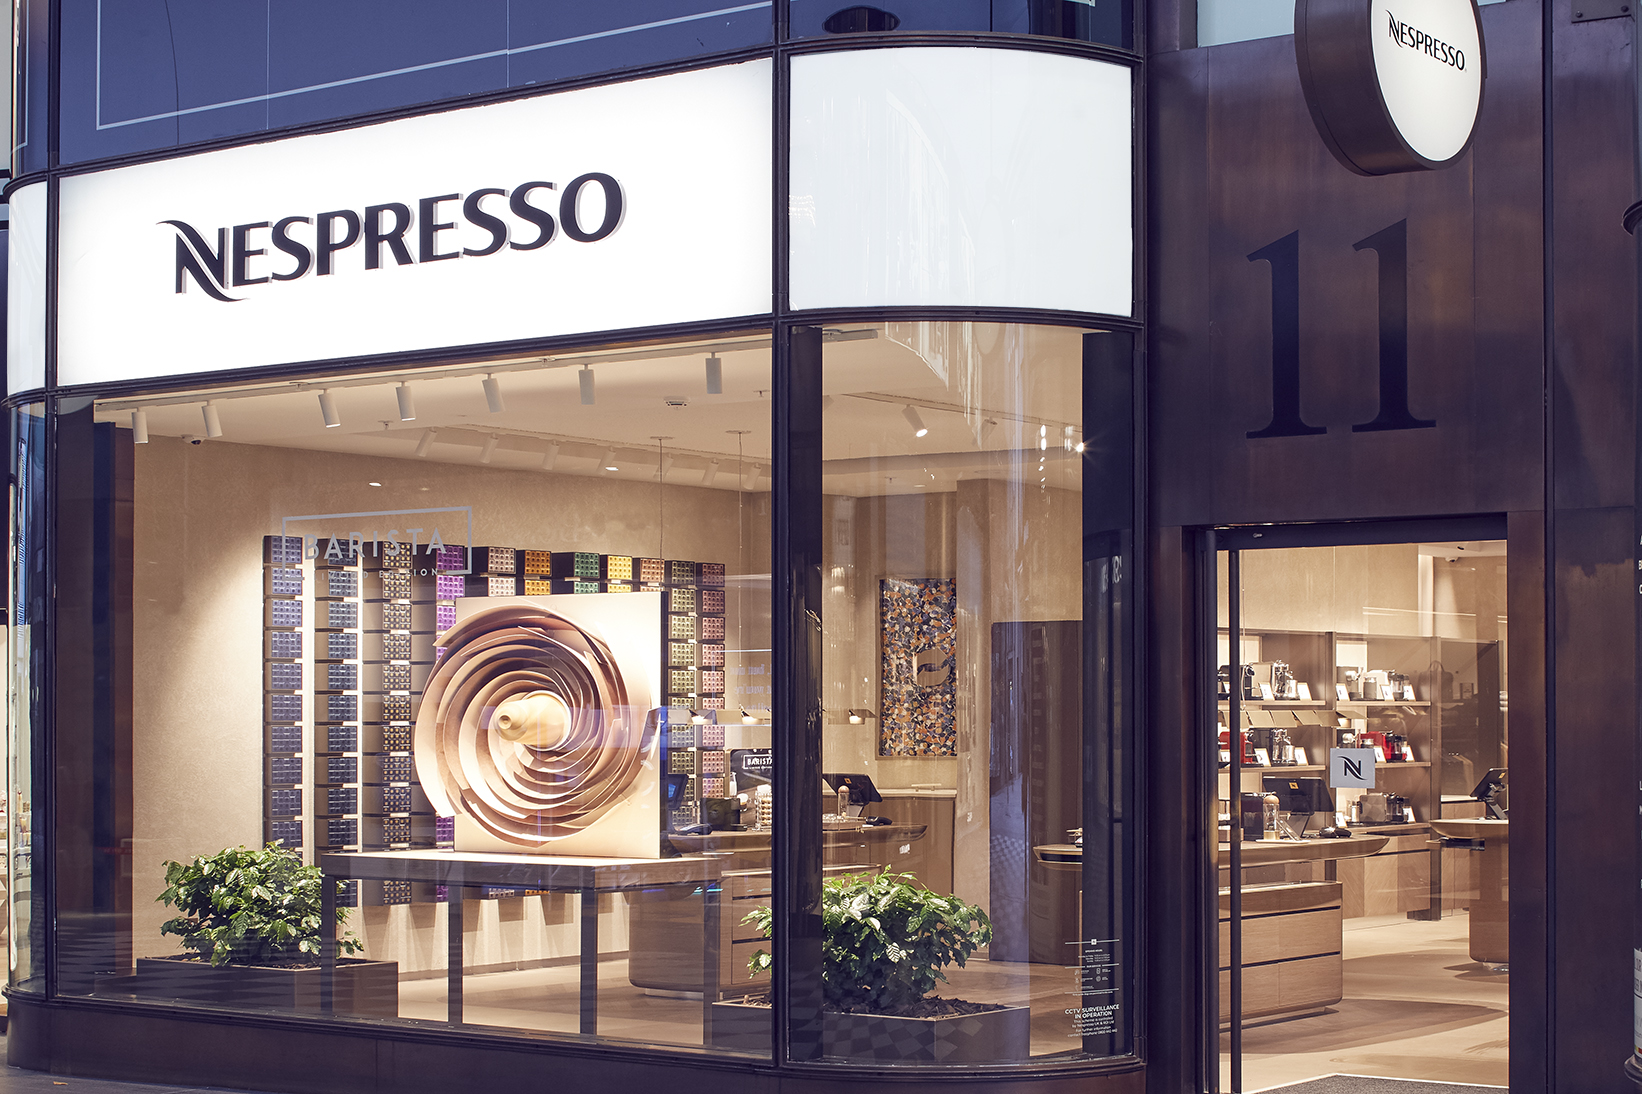 INSIDE LOOK: Nespresso premieres new boutique in the UK